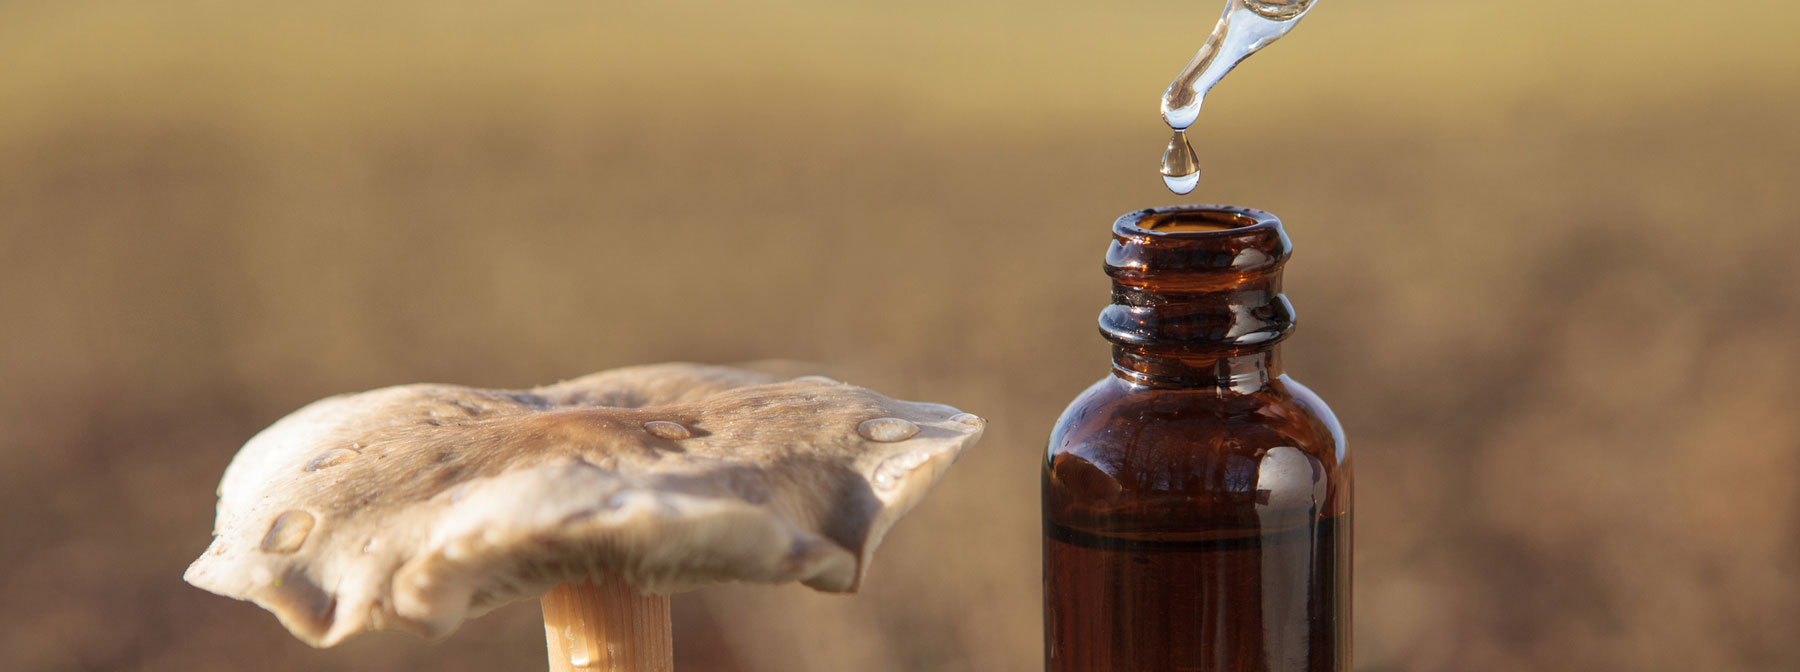 Mushroom tinctures are concentrated liquid extracts crafted by soaking medicinal and functional mushrooms in an alcohol-based solvent such as Lab Alley brand
USDA certified organic cane alcohol 190 proof.